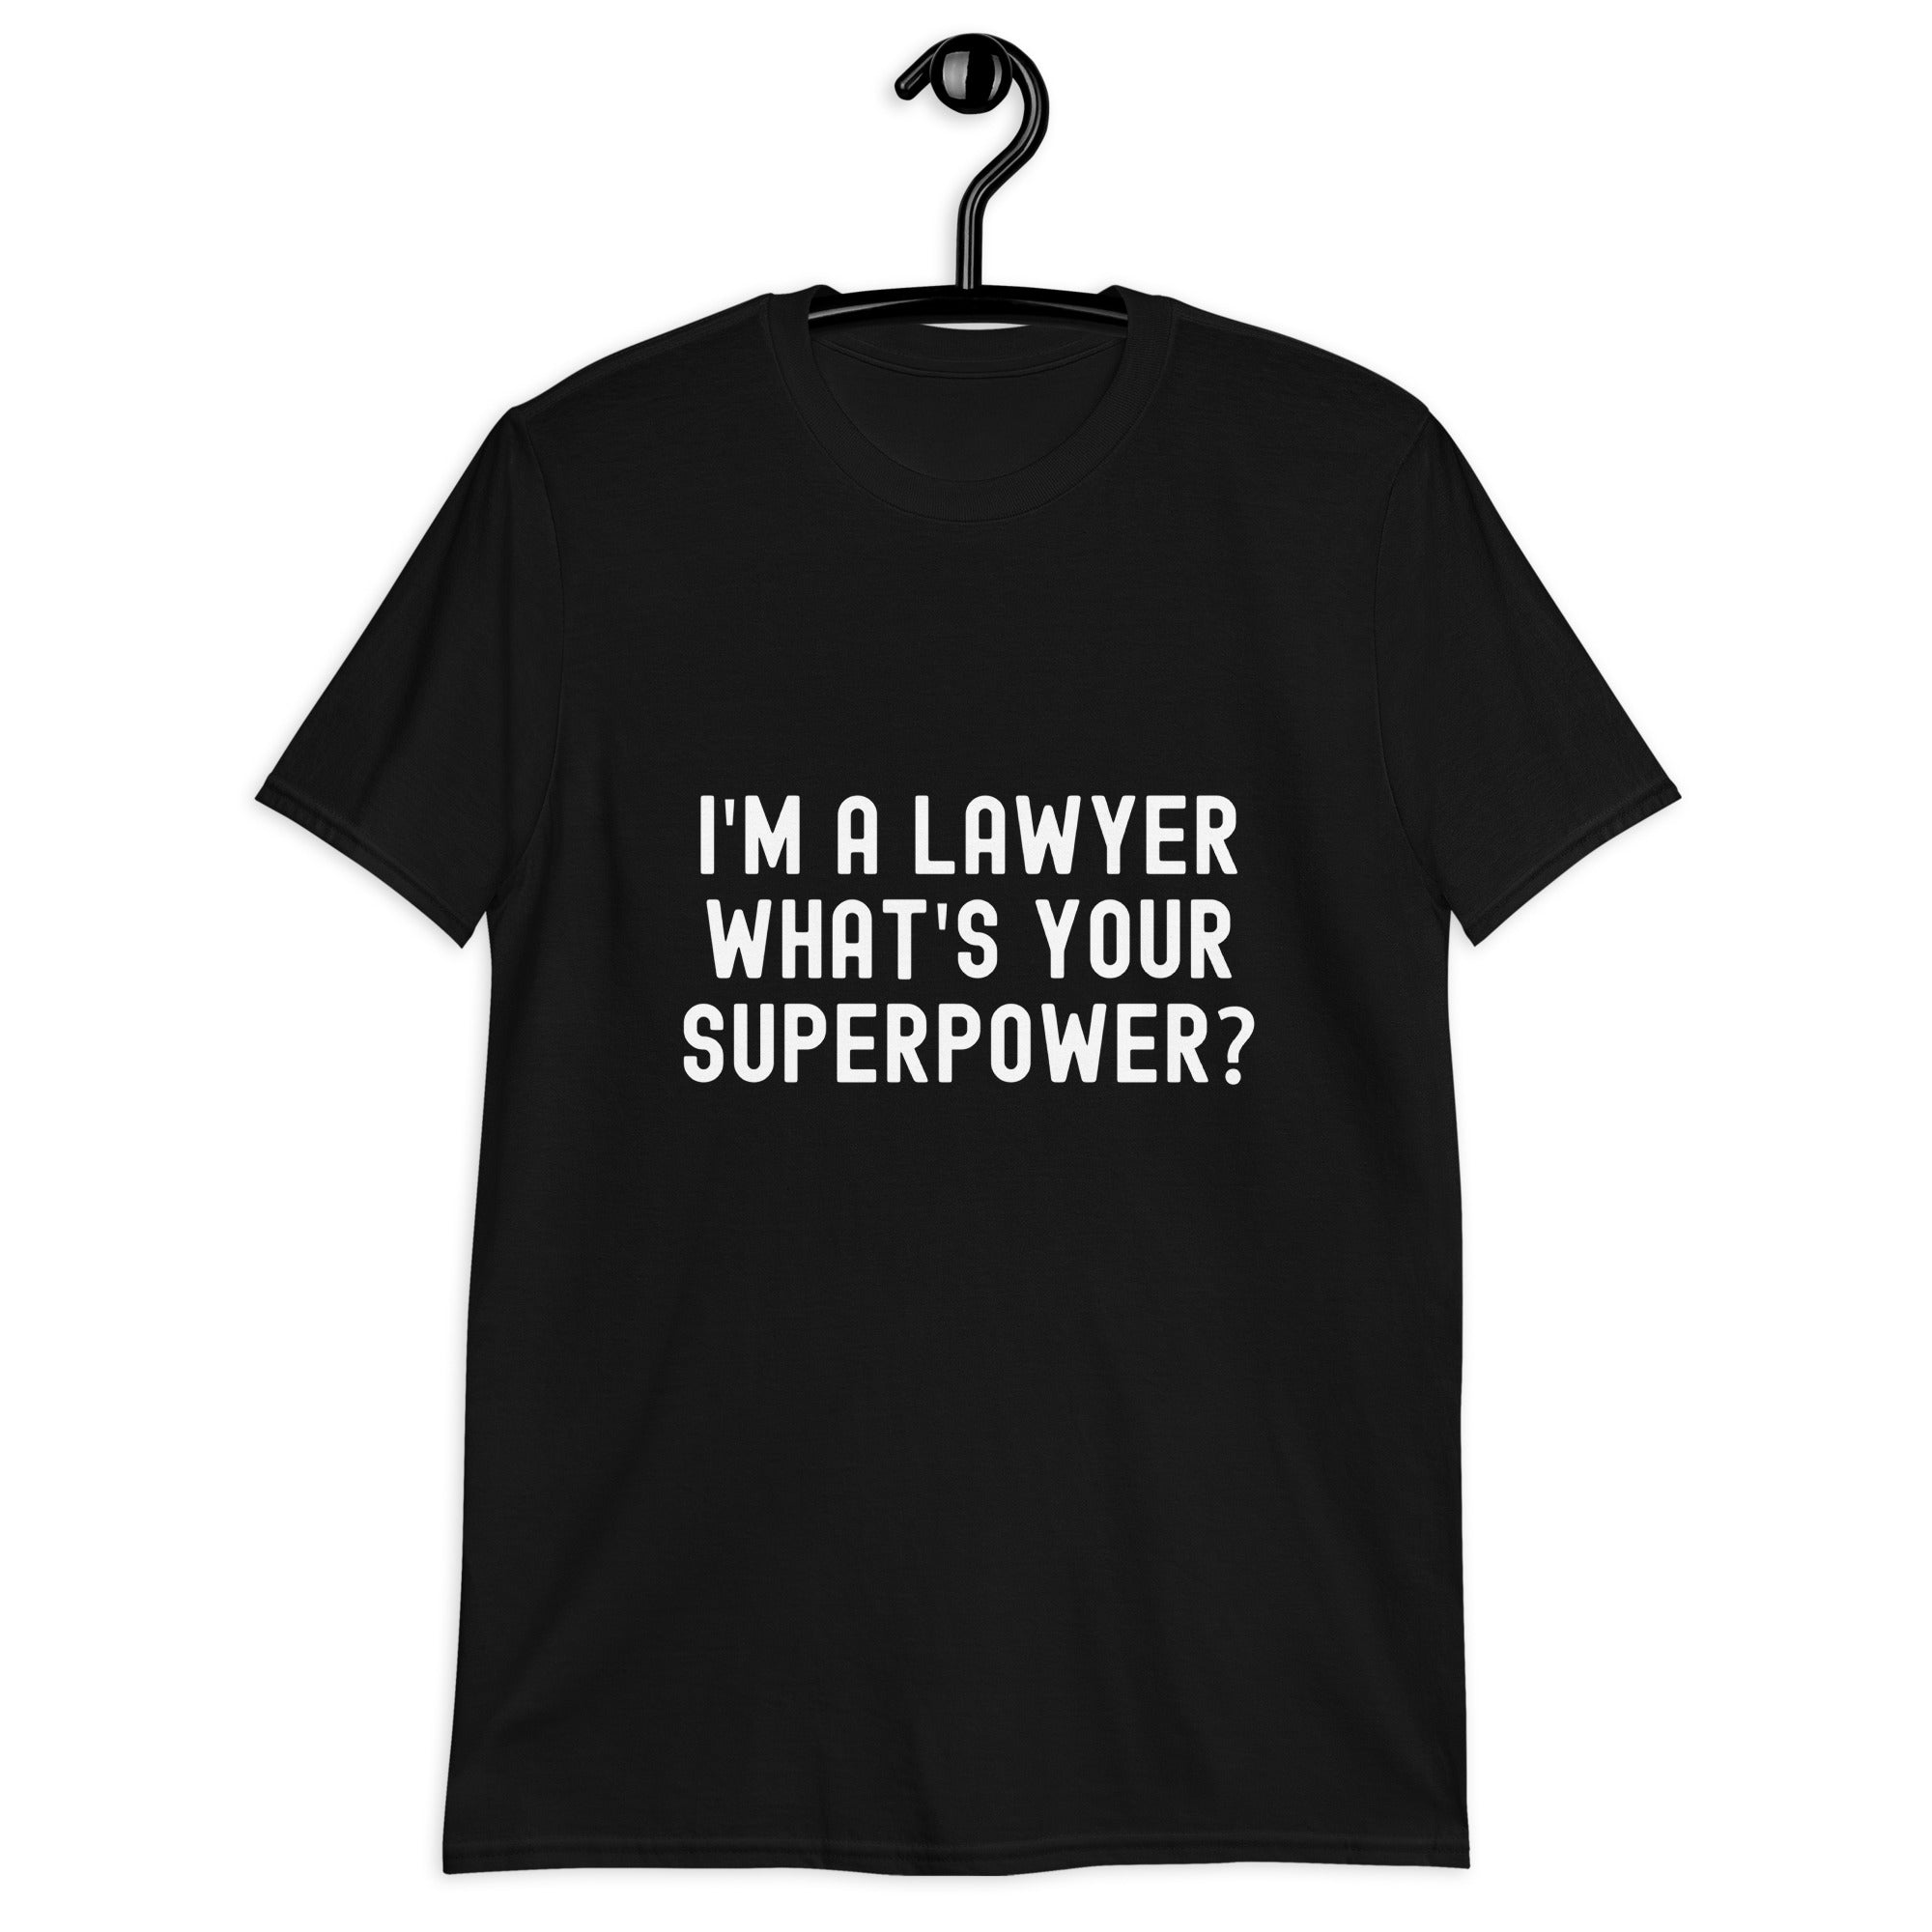 Short-Sleeve Unisex T-Shirt | I'm a lawyer, what's your superpower?